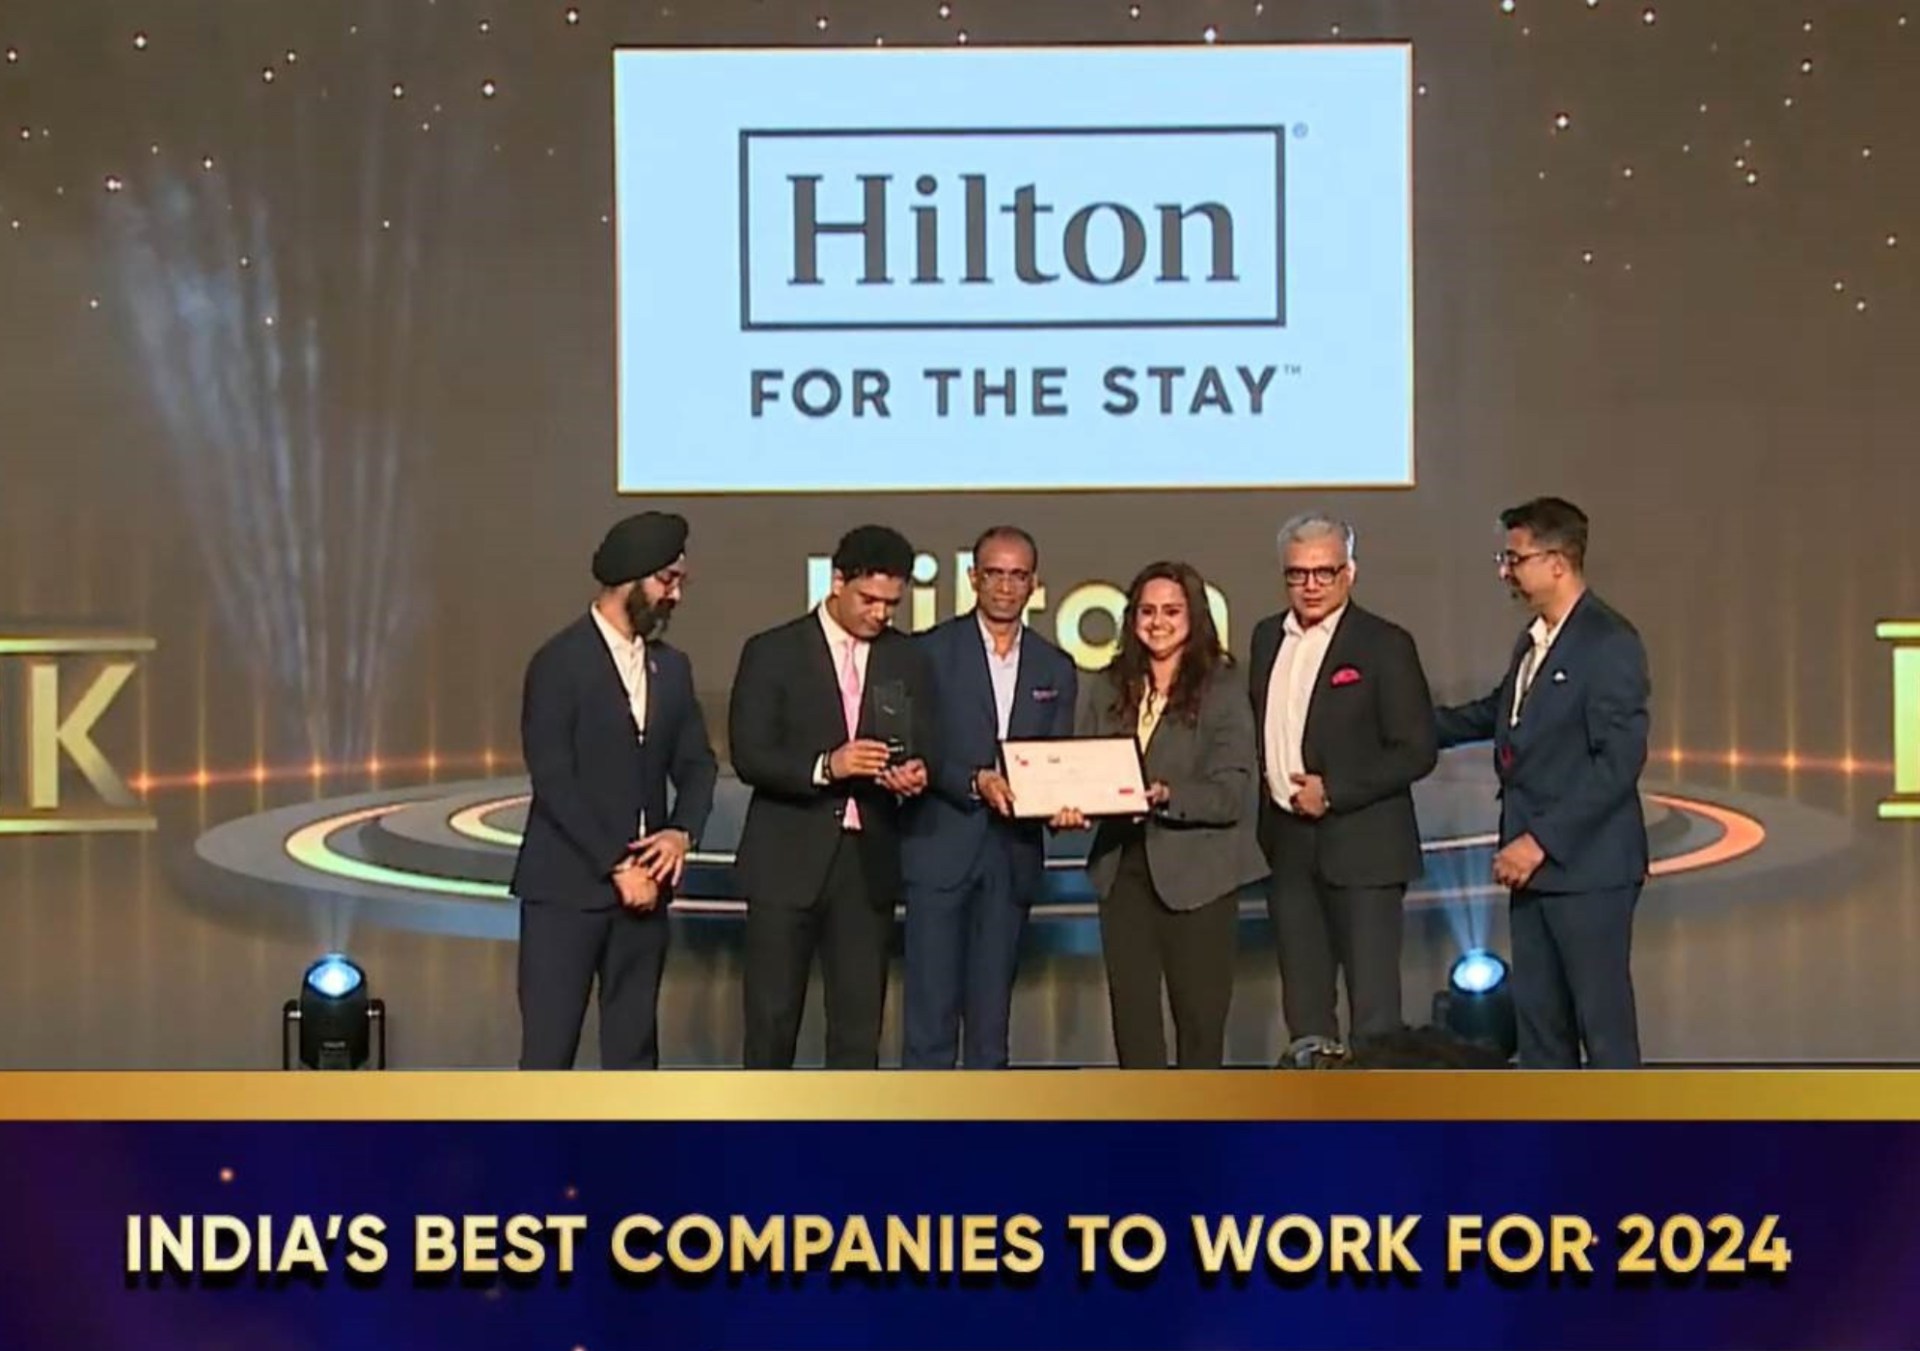 Hilton-Named-Indias-No.-1-Great-Place-to-Work-2024-Award-Ceremony-Image